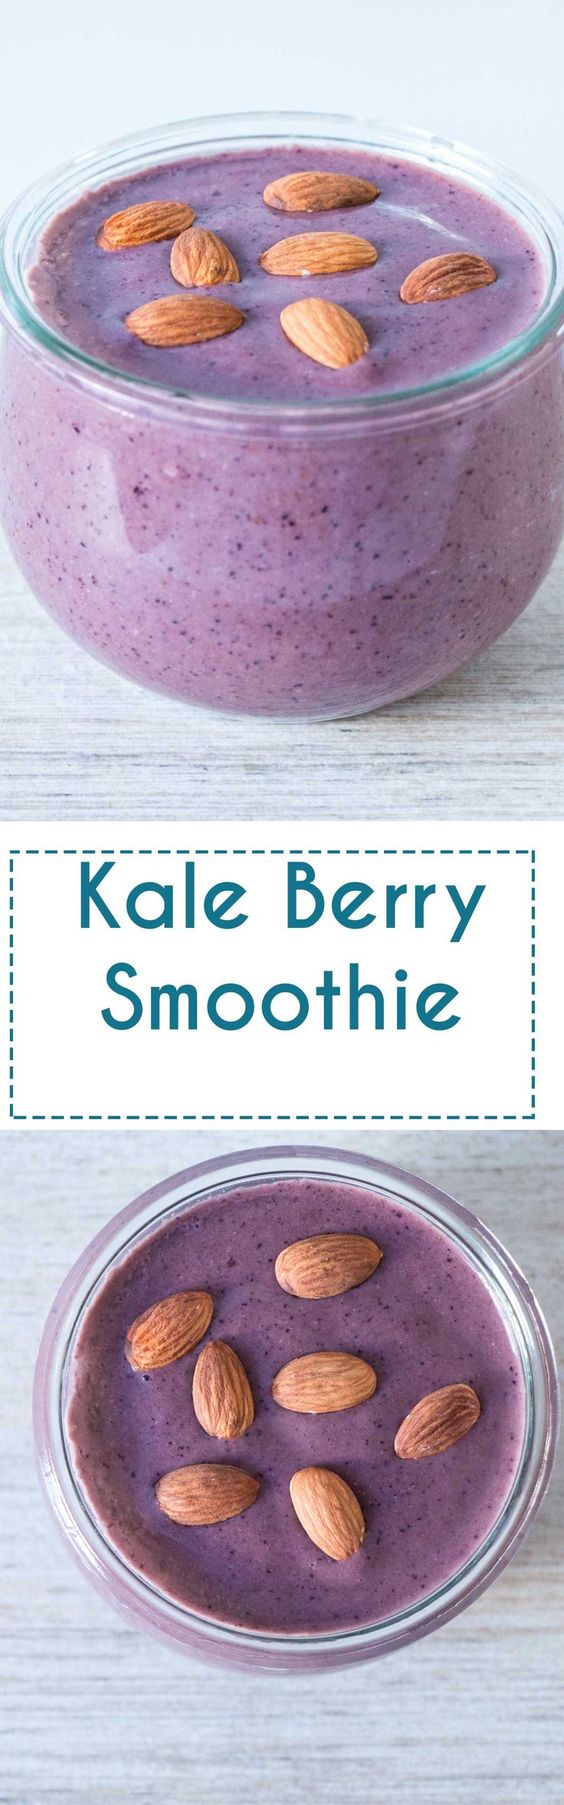 Find cool tips on how to prepare easy healthy smoothie recipes with this comprehensive guide. Discover alternatives to strawberry smoothie recipes. #healthyeating #healthyrecipes #healthyhabits #wellness #nutrition #nobake #healthylife #healthymeals